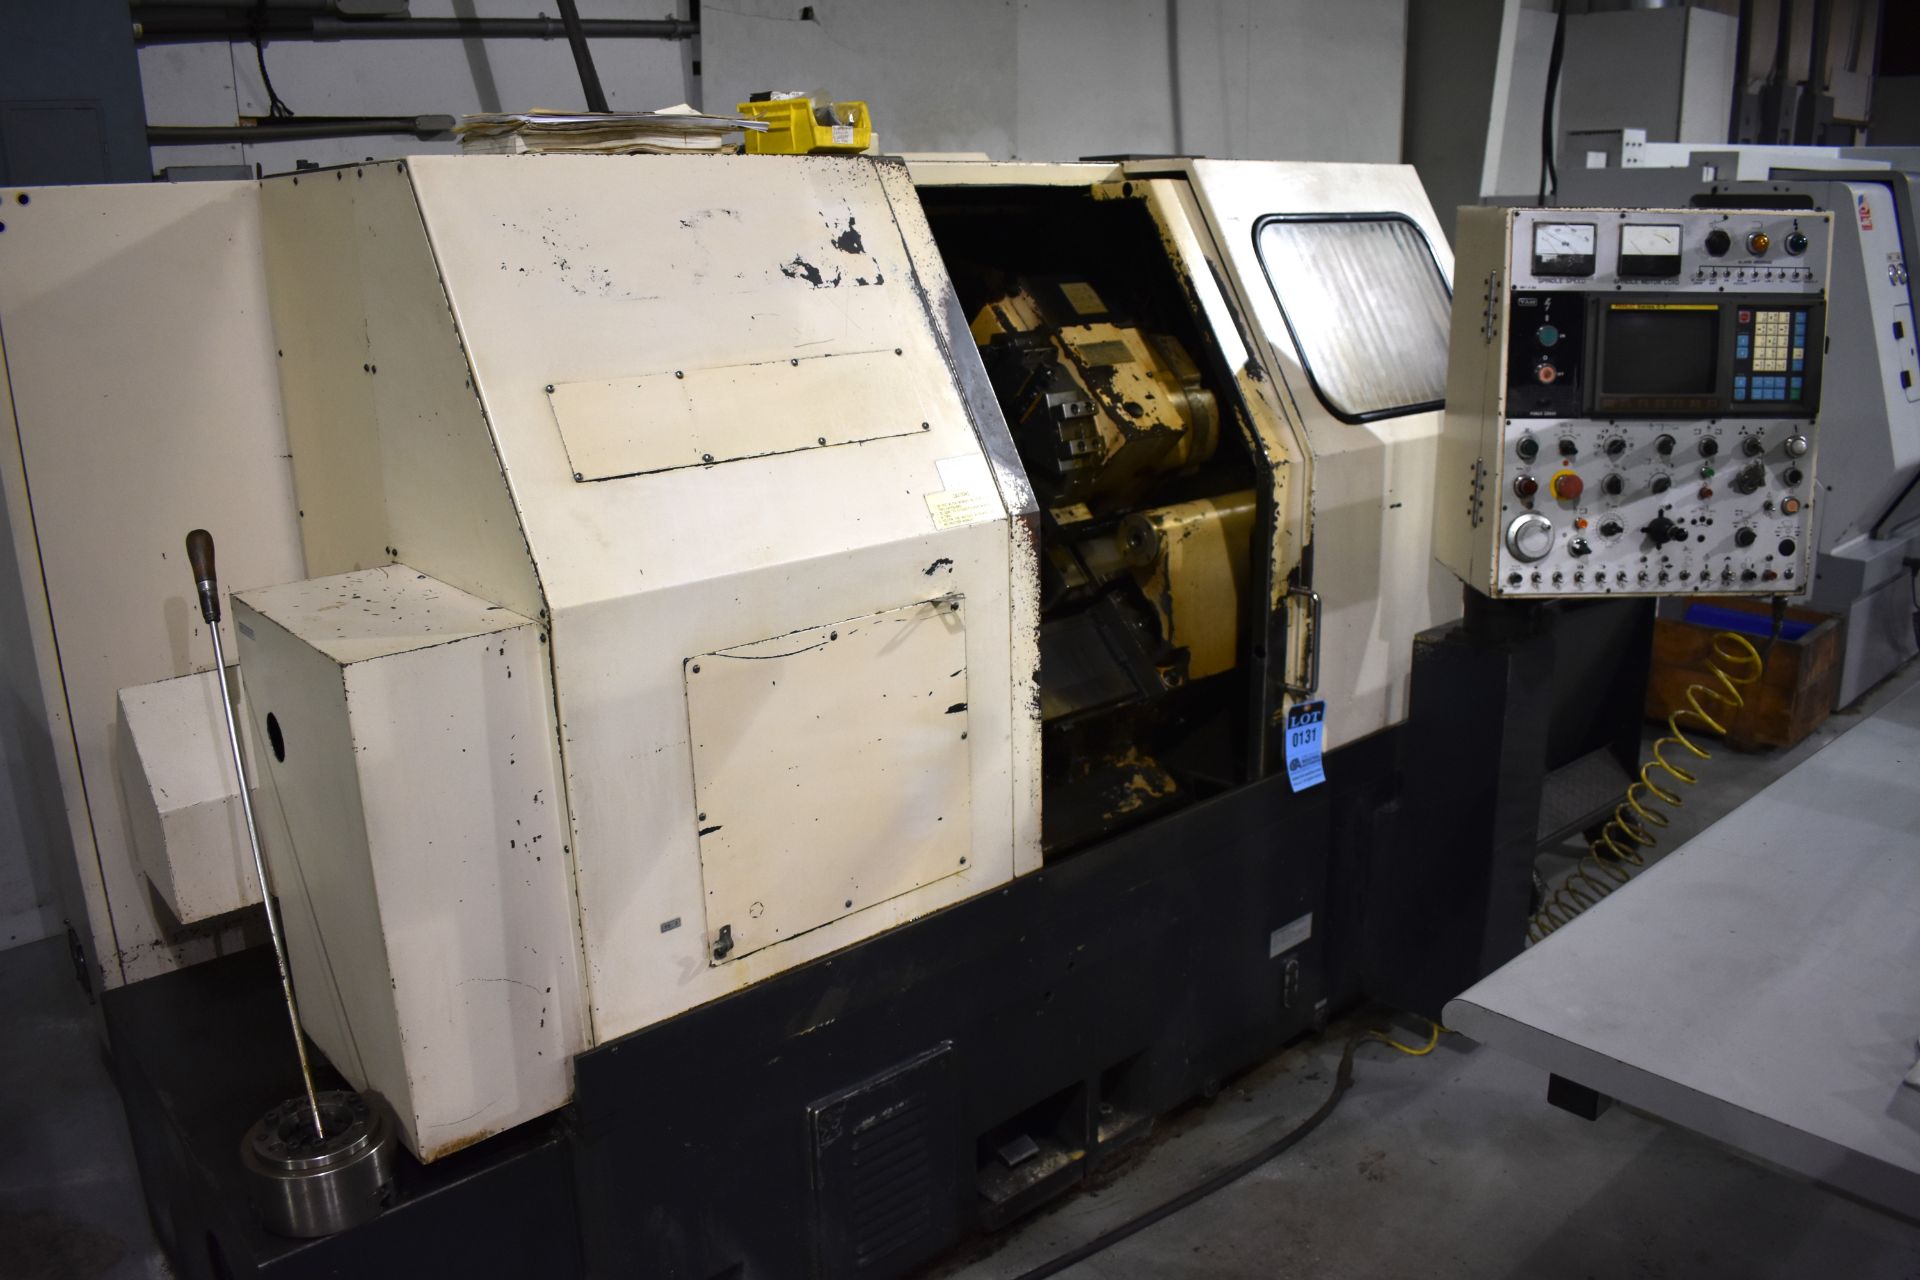 YAM MODEL CK-1A CNC TURNING CENTER; FANUC O-T CONTROL, COLLET CHUCK, 6" 3-JAW CHUCK, TAILSTOCK, CHIP